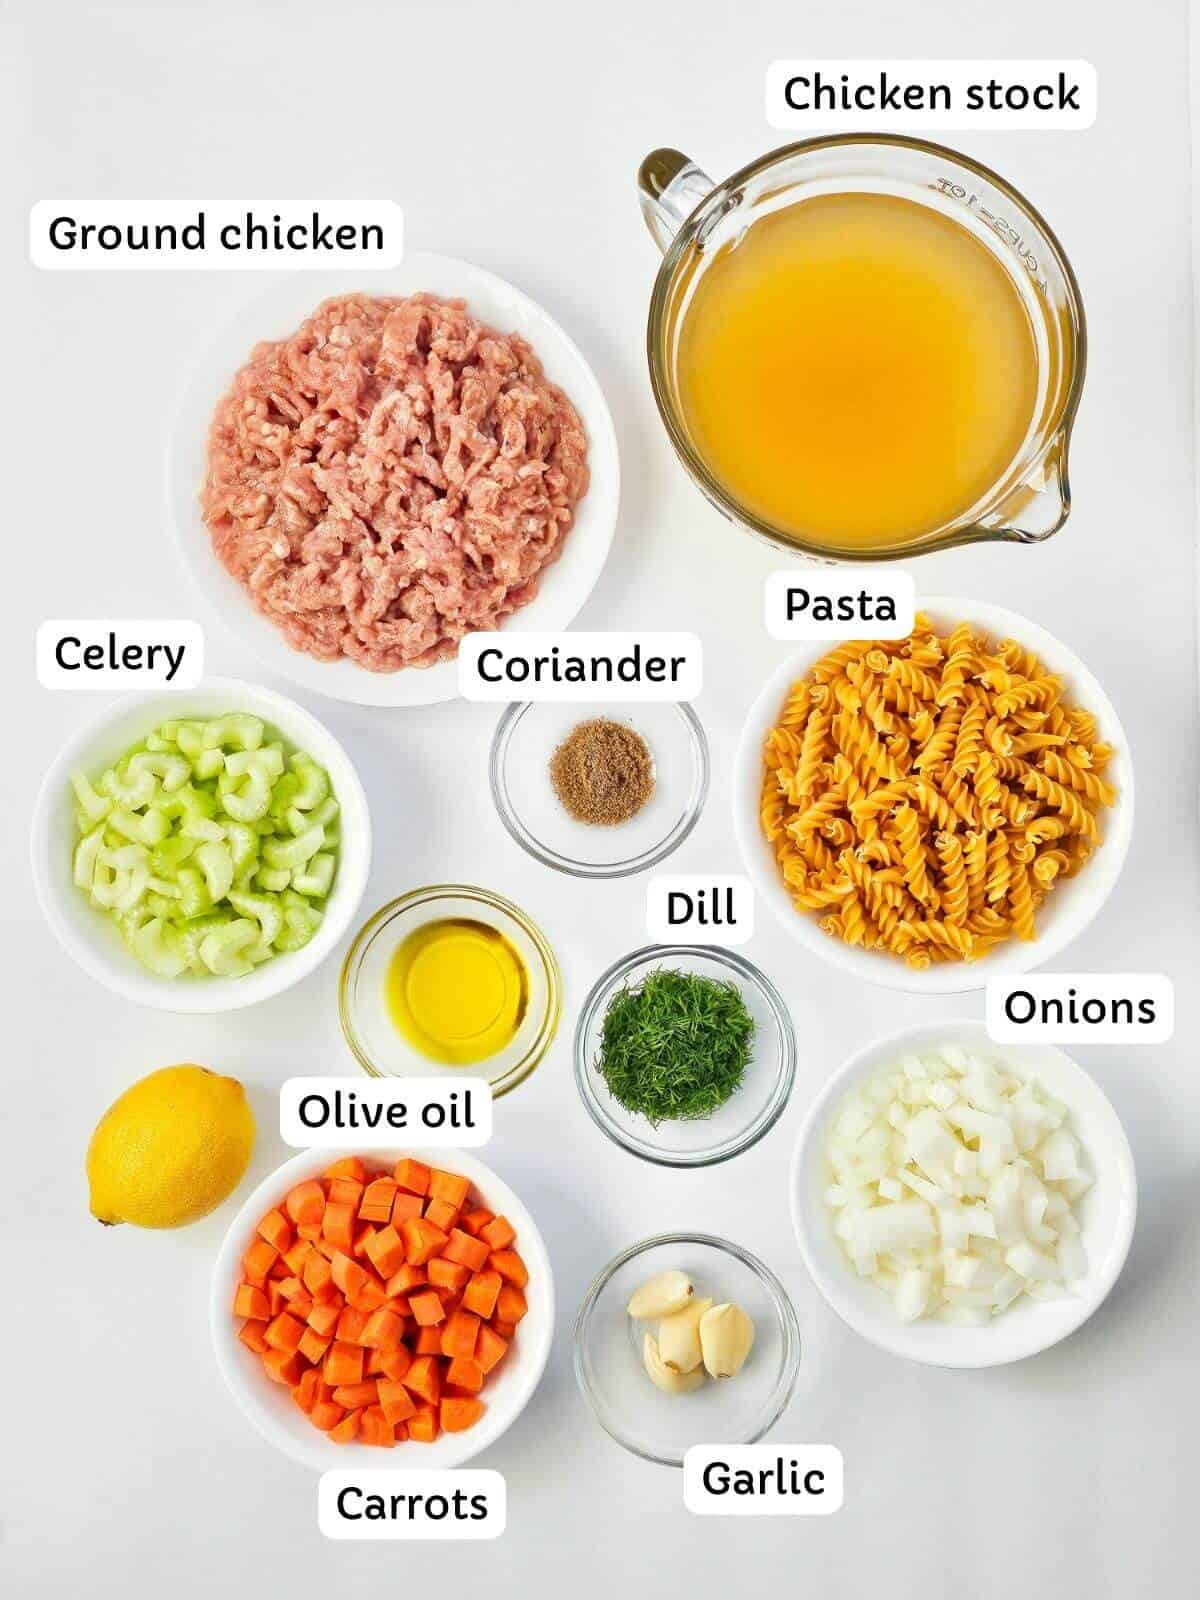 Ingredients for making ground chicken soup in small bowls.